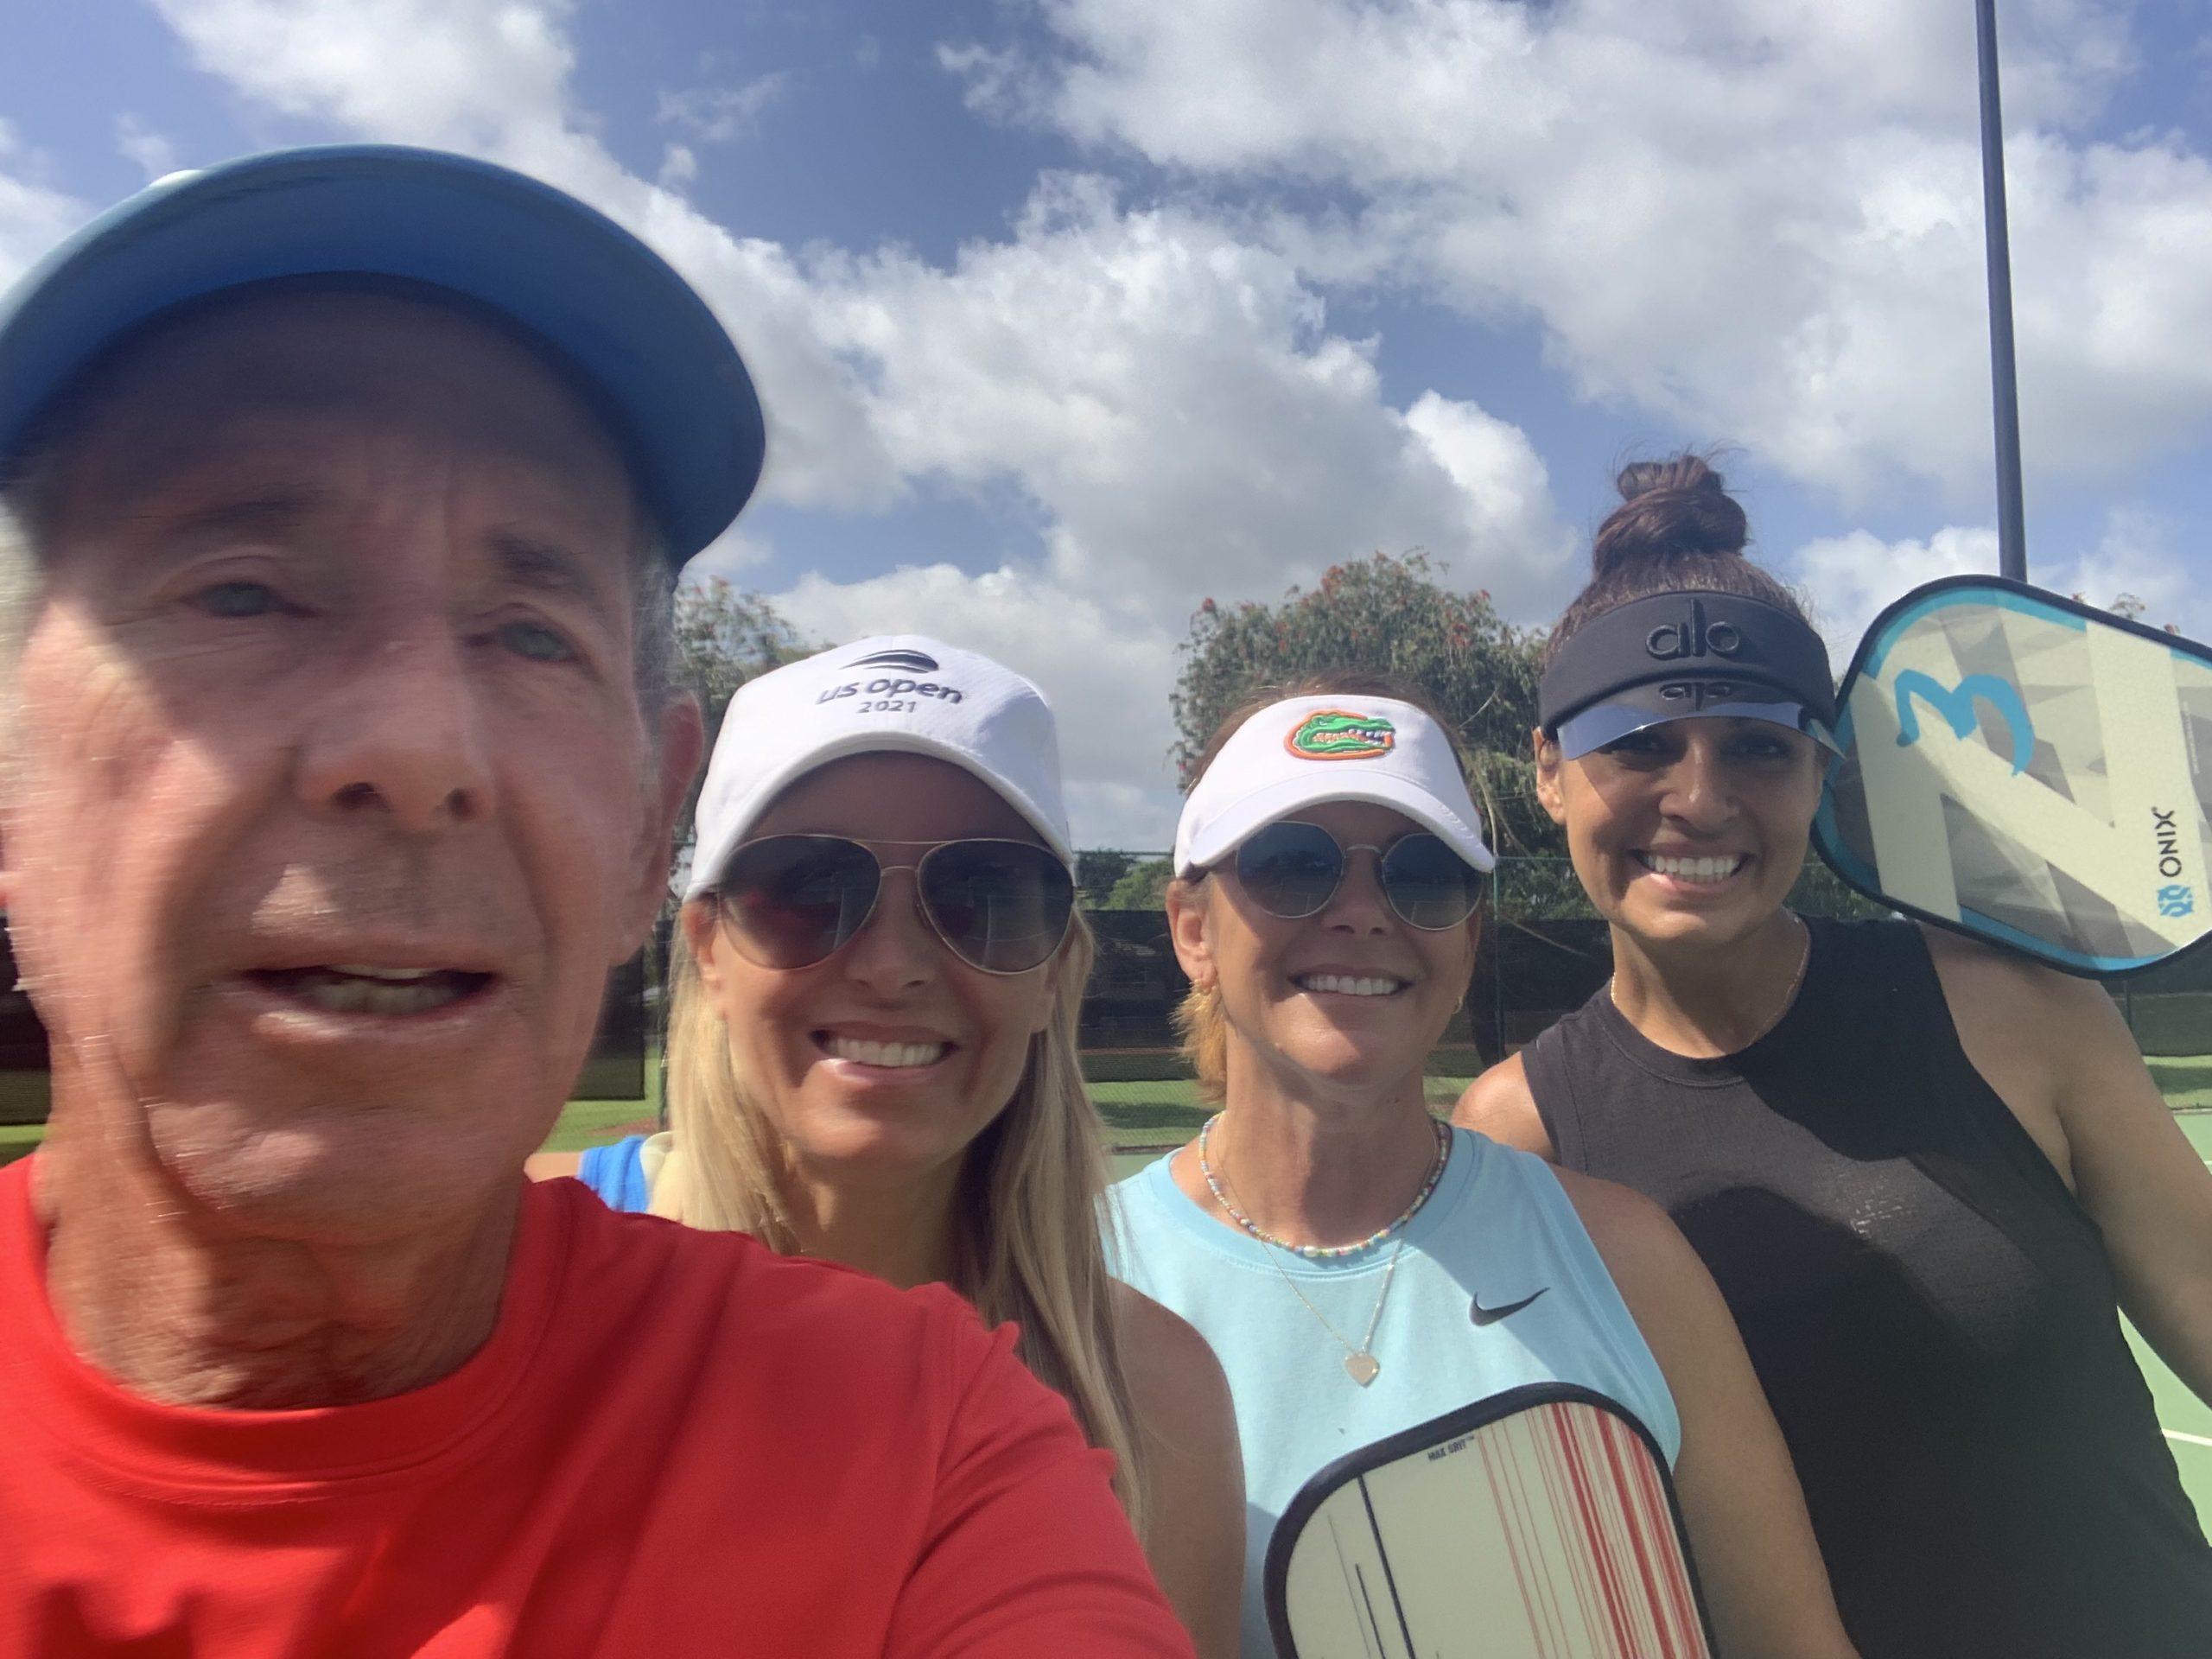 bob-with-lorraine-samantha-and-tracy-after-a-pickleball-clinic-at-smith-farms-in-lake-worth